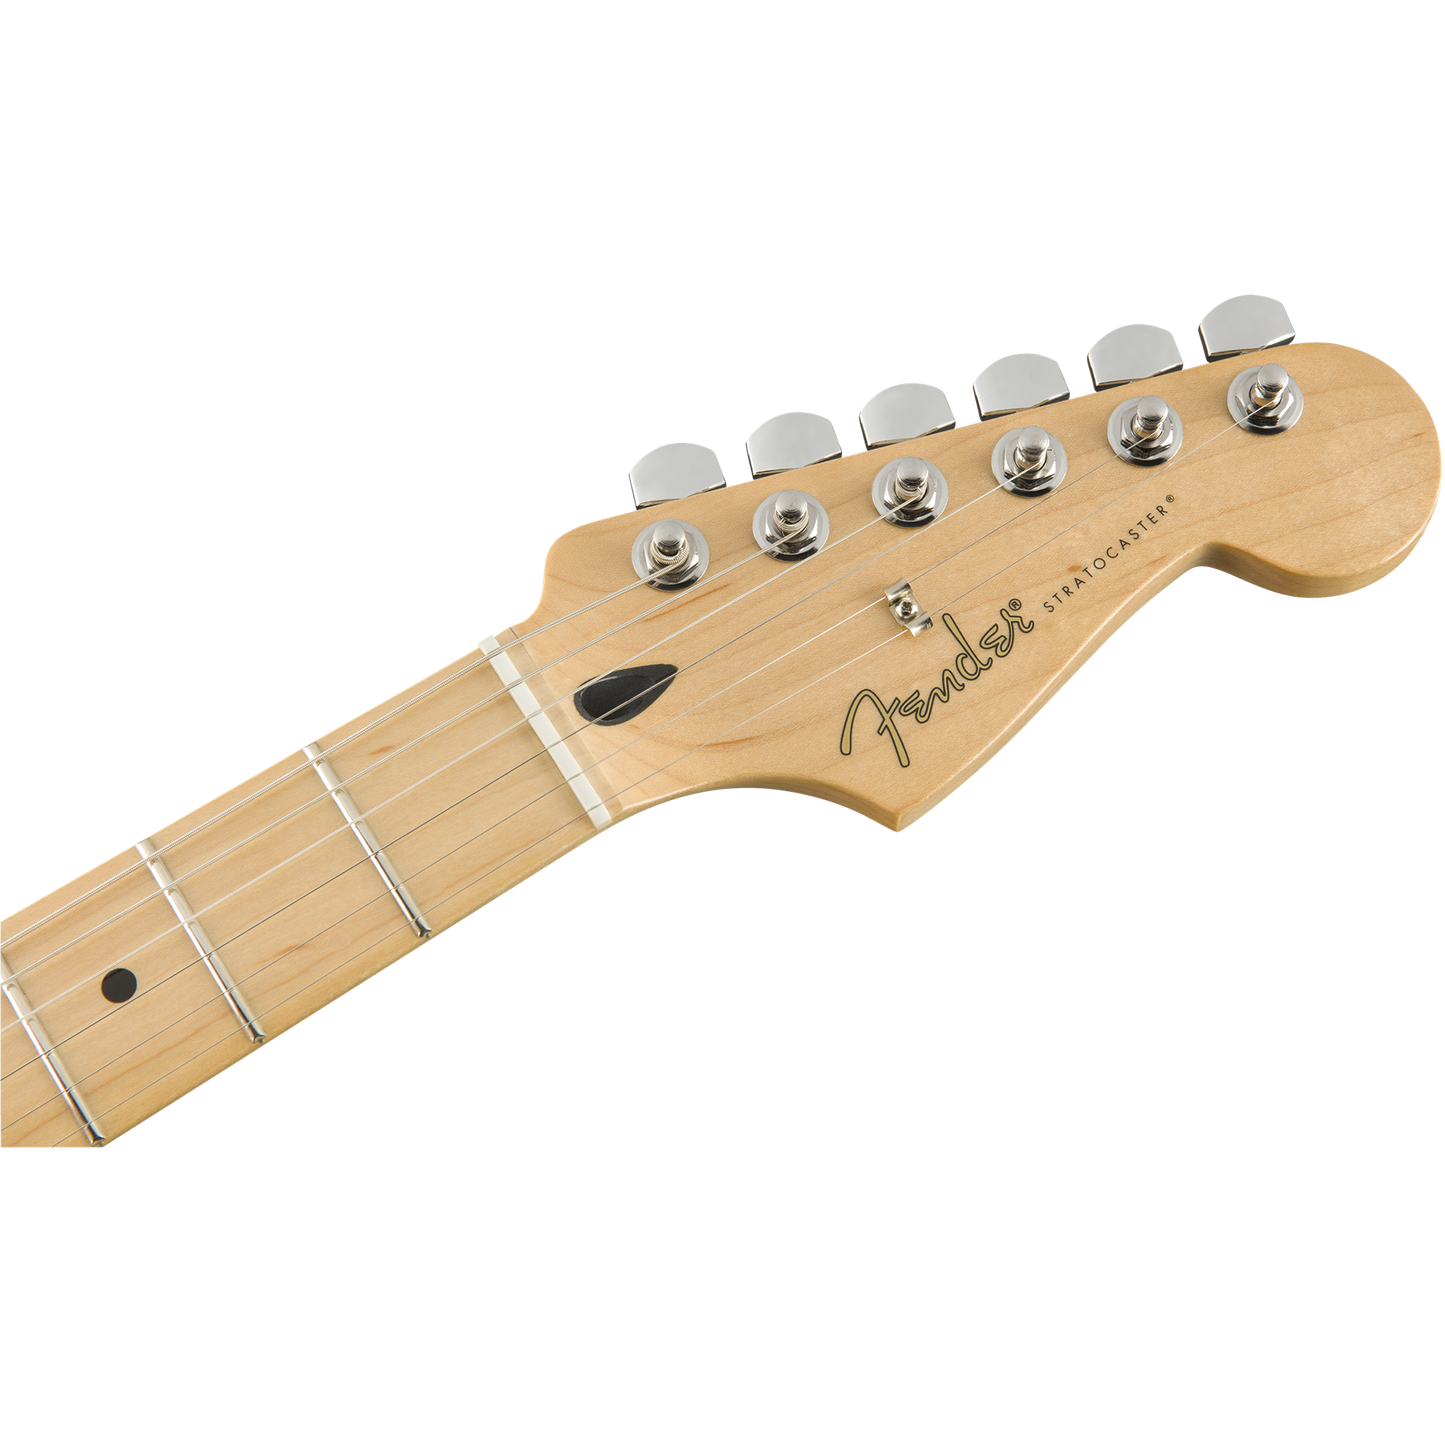 Fender Player Stratocaster® HSS Electric Guitar, Tidepool